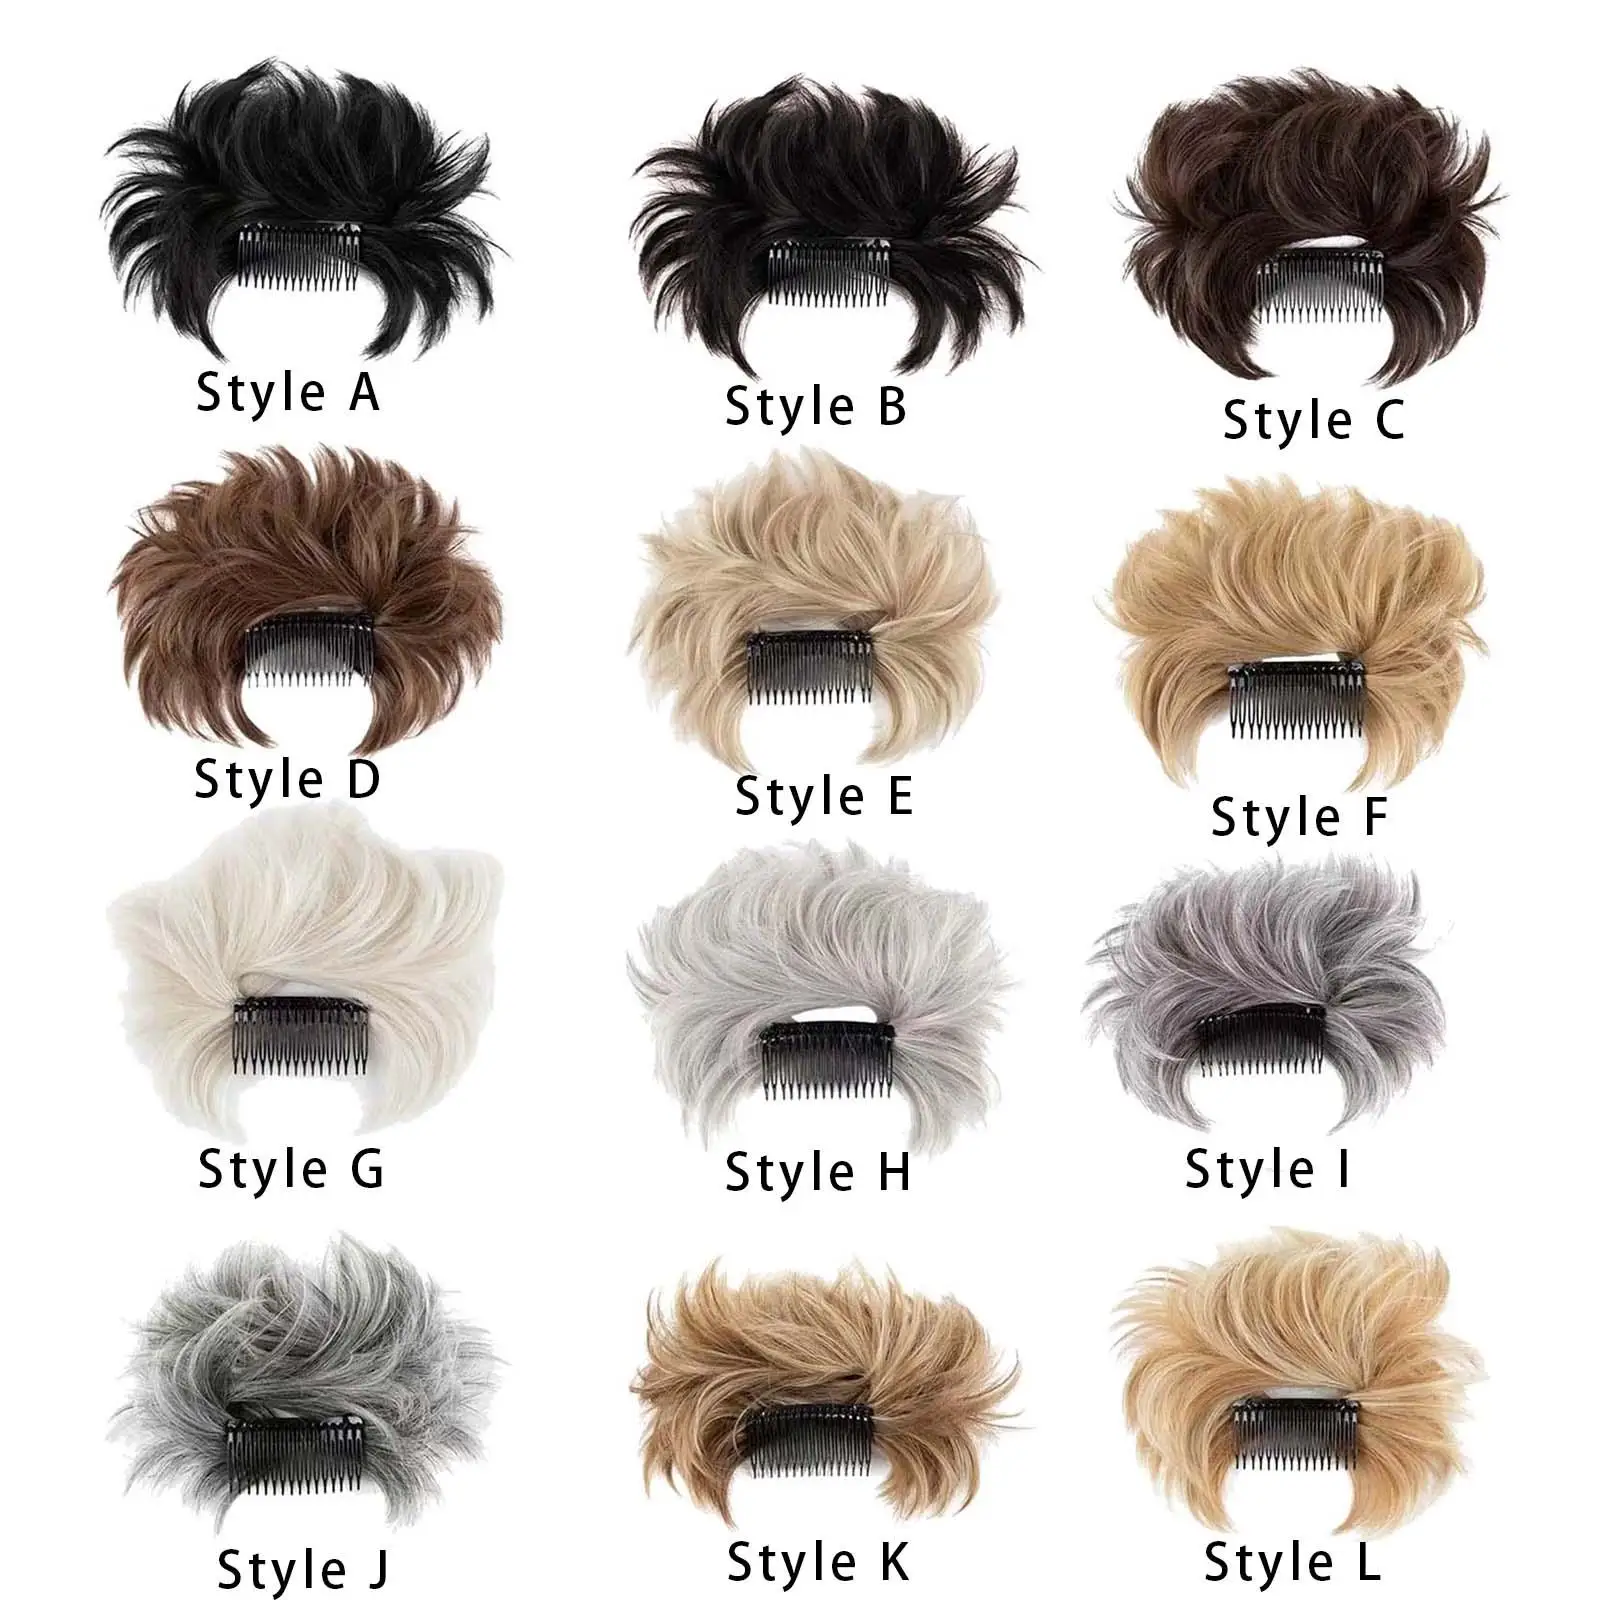 Side Comb Hair Messy Buns Hair Bun Extension Women Messy Bun Hairpieces for All Hair Types Styling Long Hair Thick Hairs Party